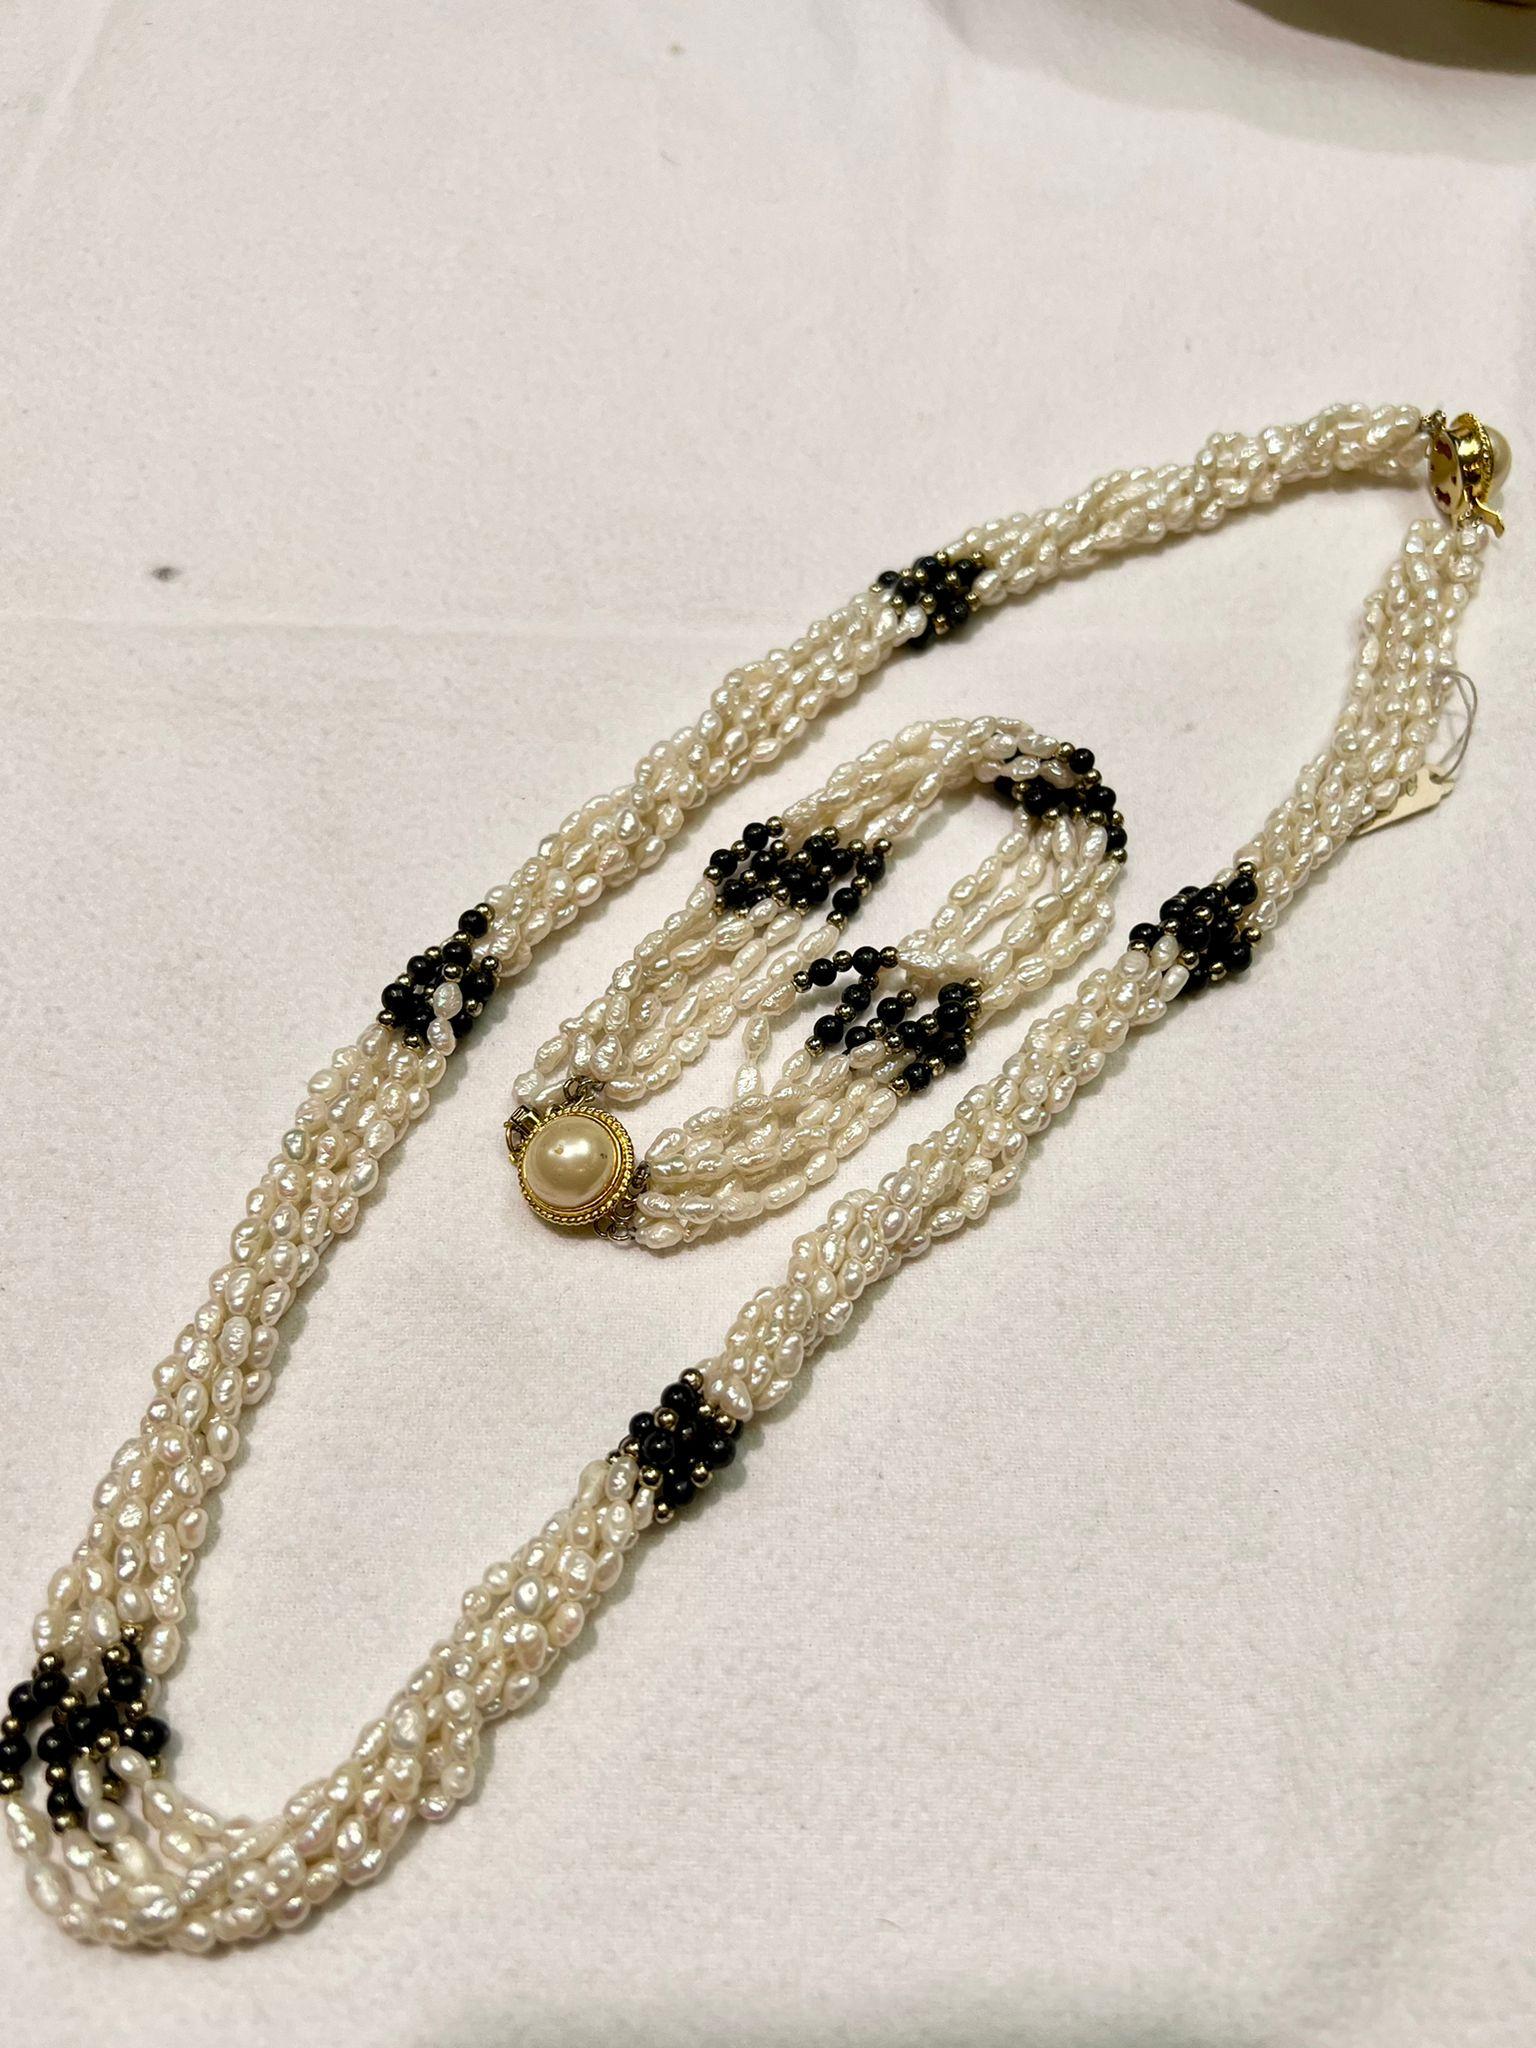 Set of Necklace and Bracelet Freshwater Pearls with Mabe Pearl Clasp Necklace 2 For Sale 7